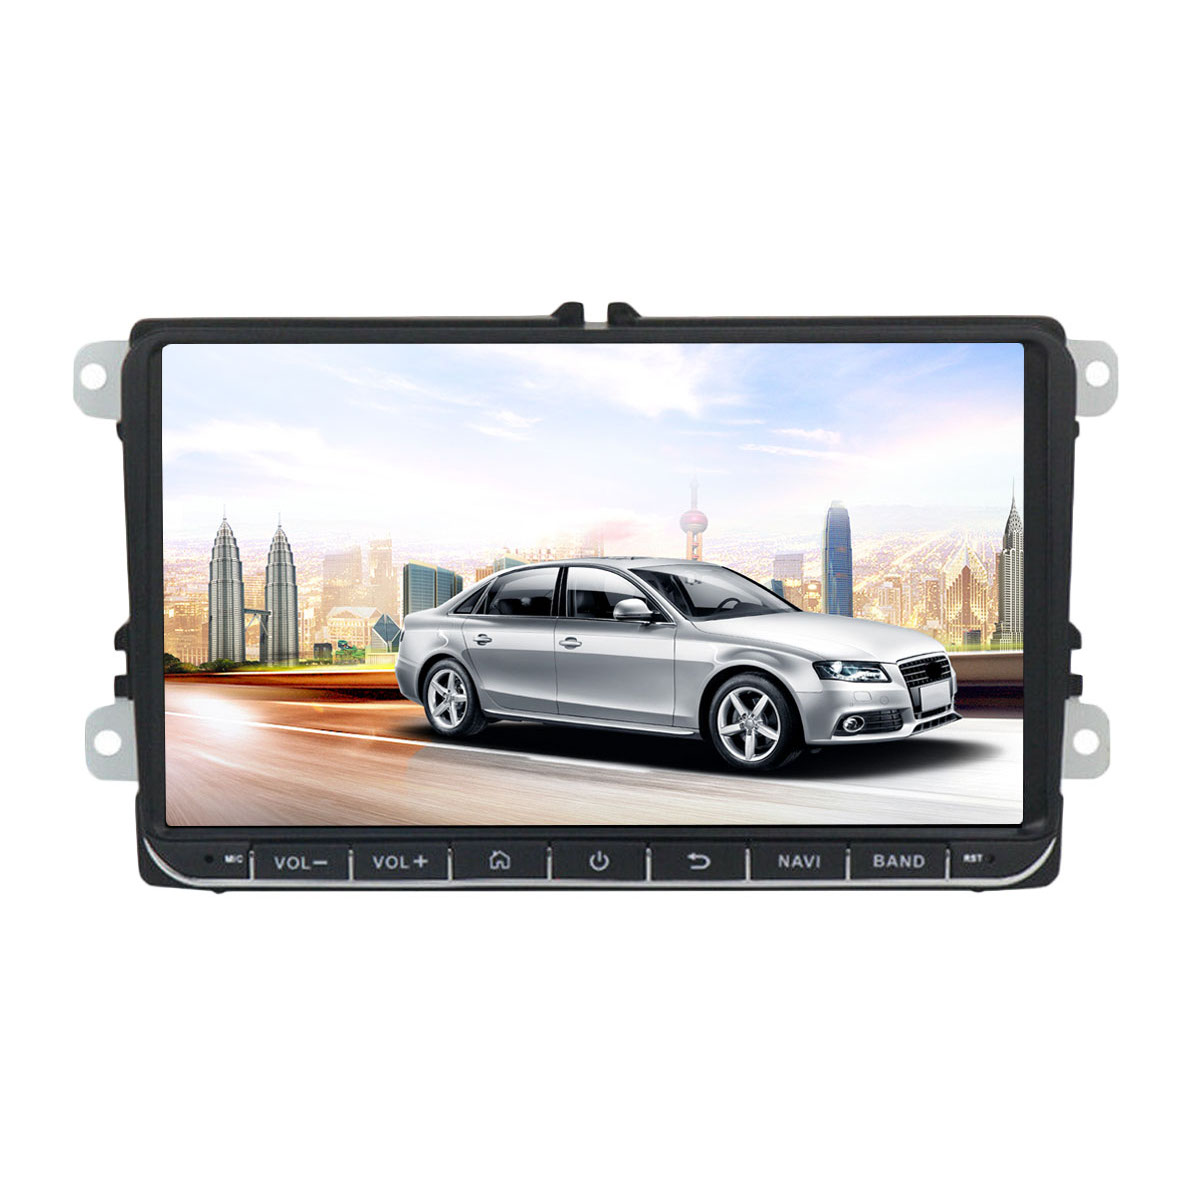 

9 Inch for Android 8.1 Car Stereo MP5 Player 1+16G Quad Core 2 DIN Touch Screen GPS bluetooth WIFI for VW Skoda Seat